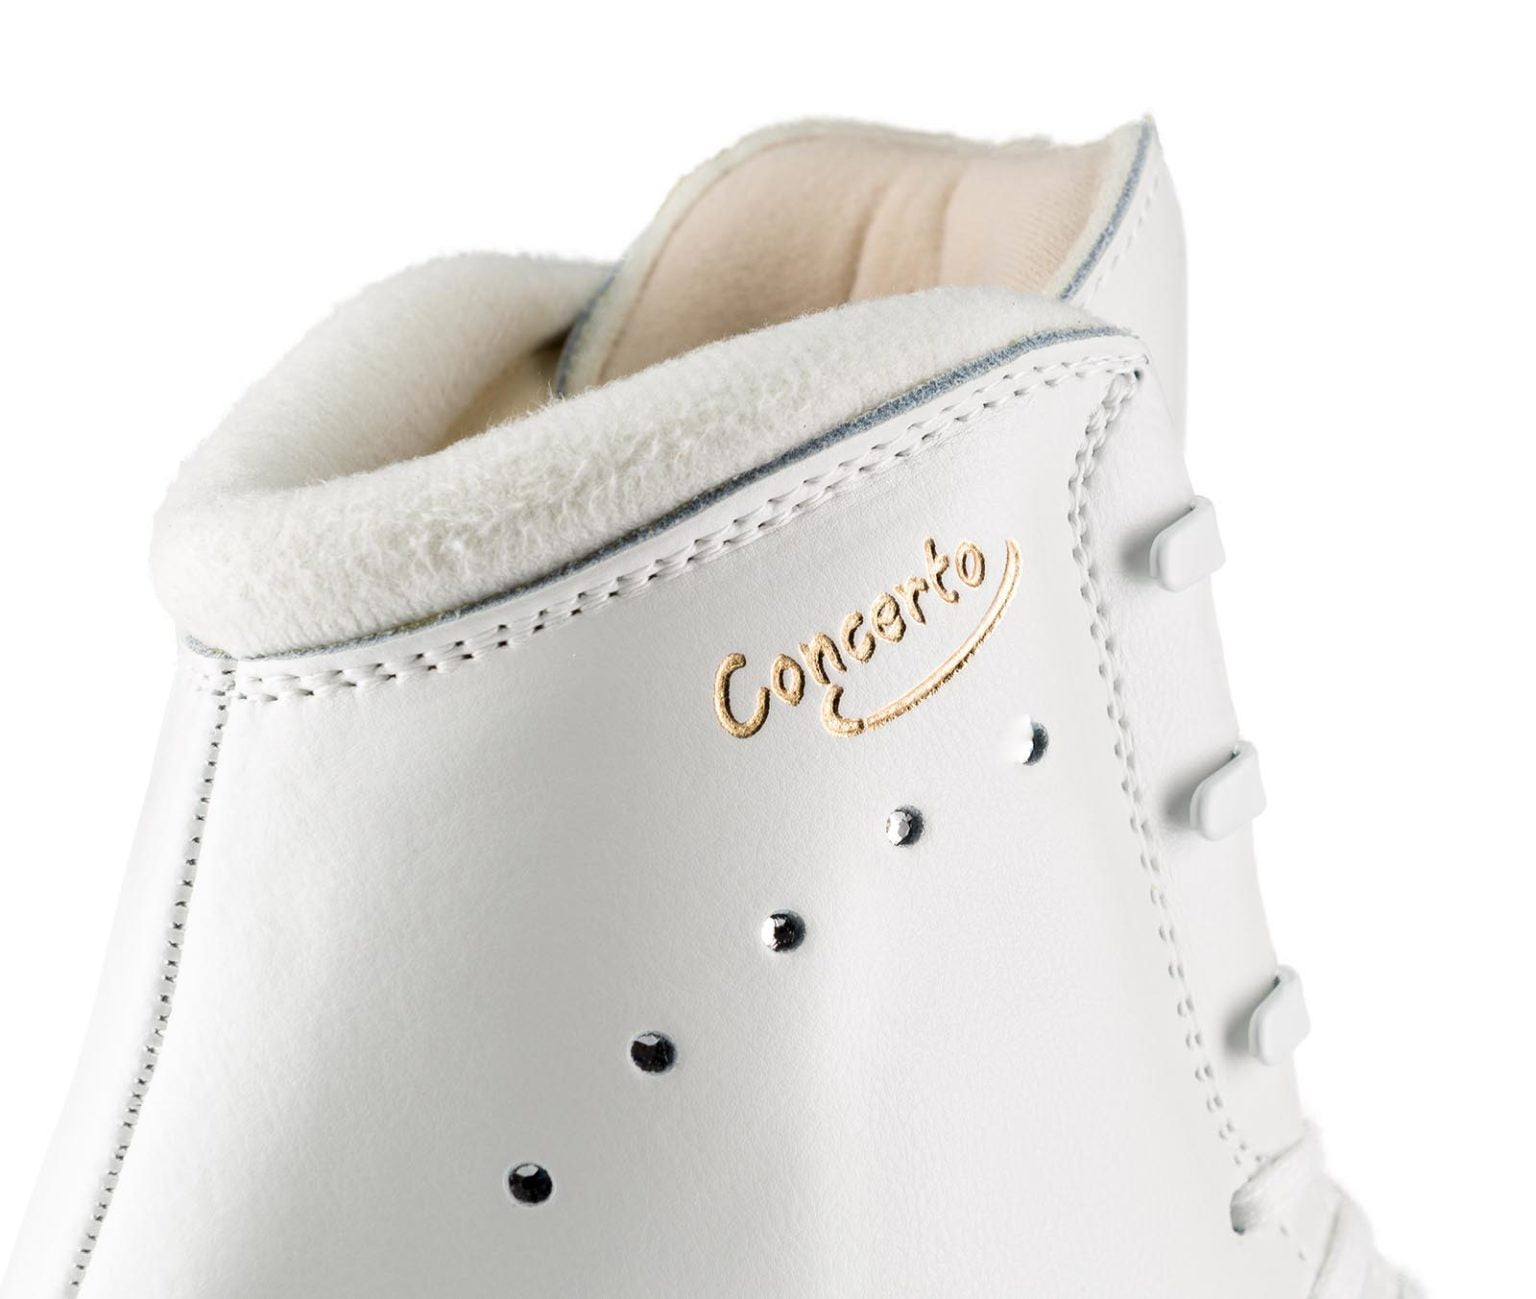 Edea Concerto Boot Only in Ivory. Senior Sizes 260 - 290